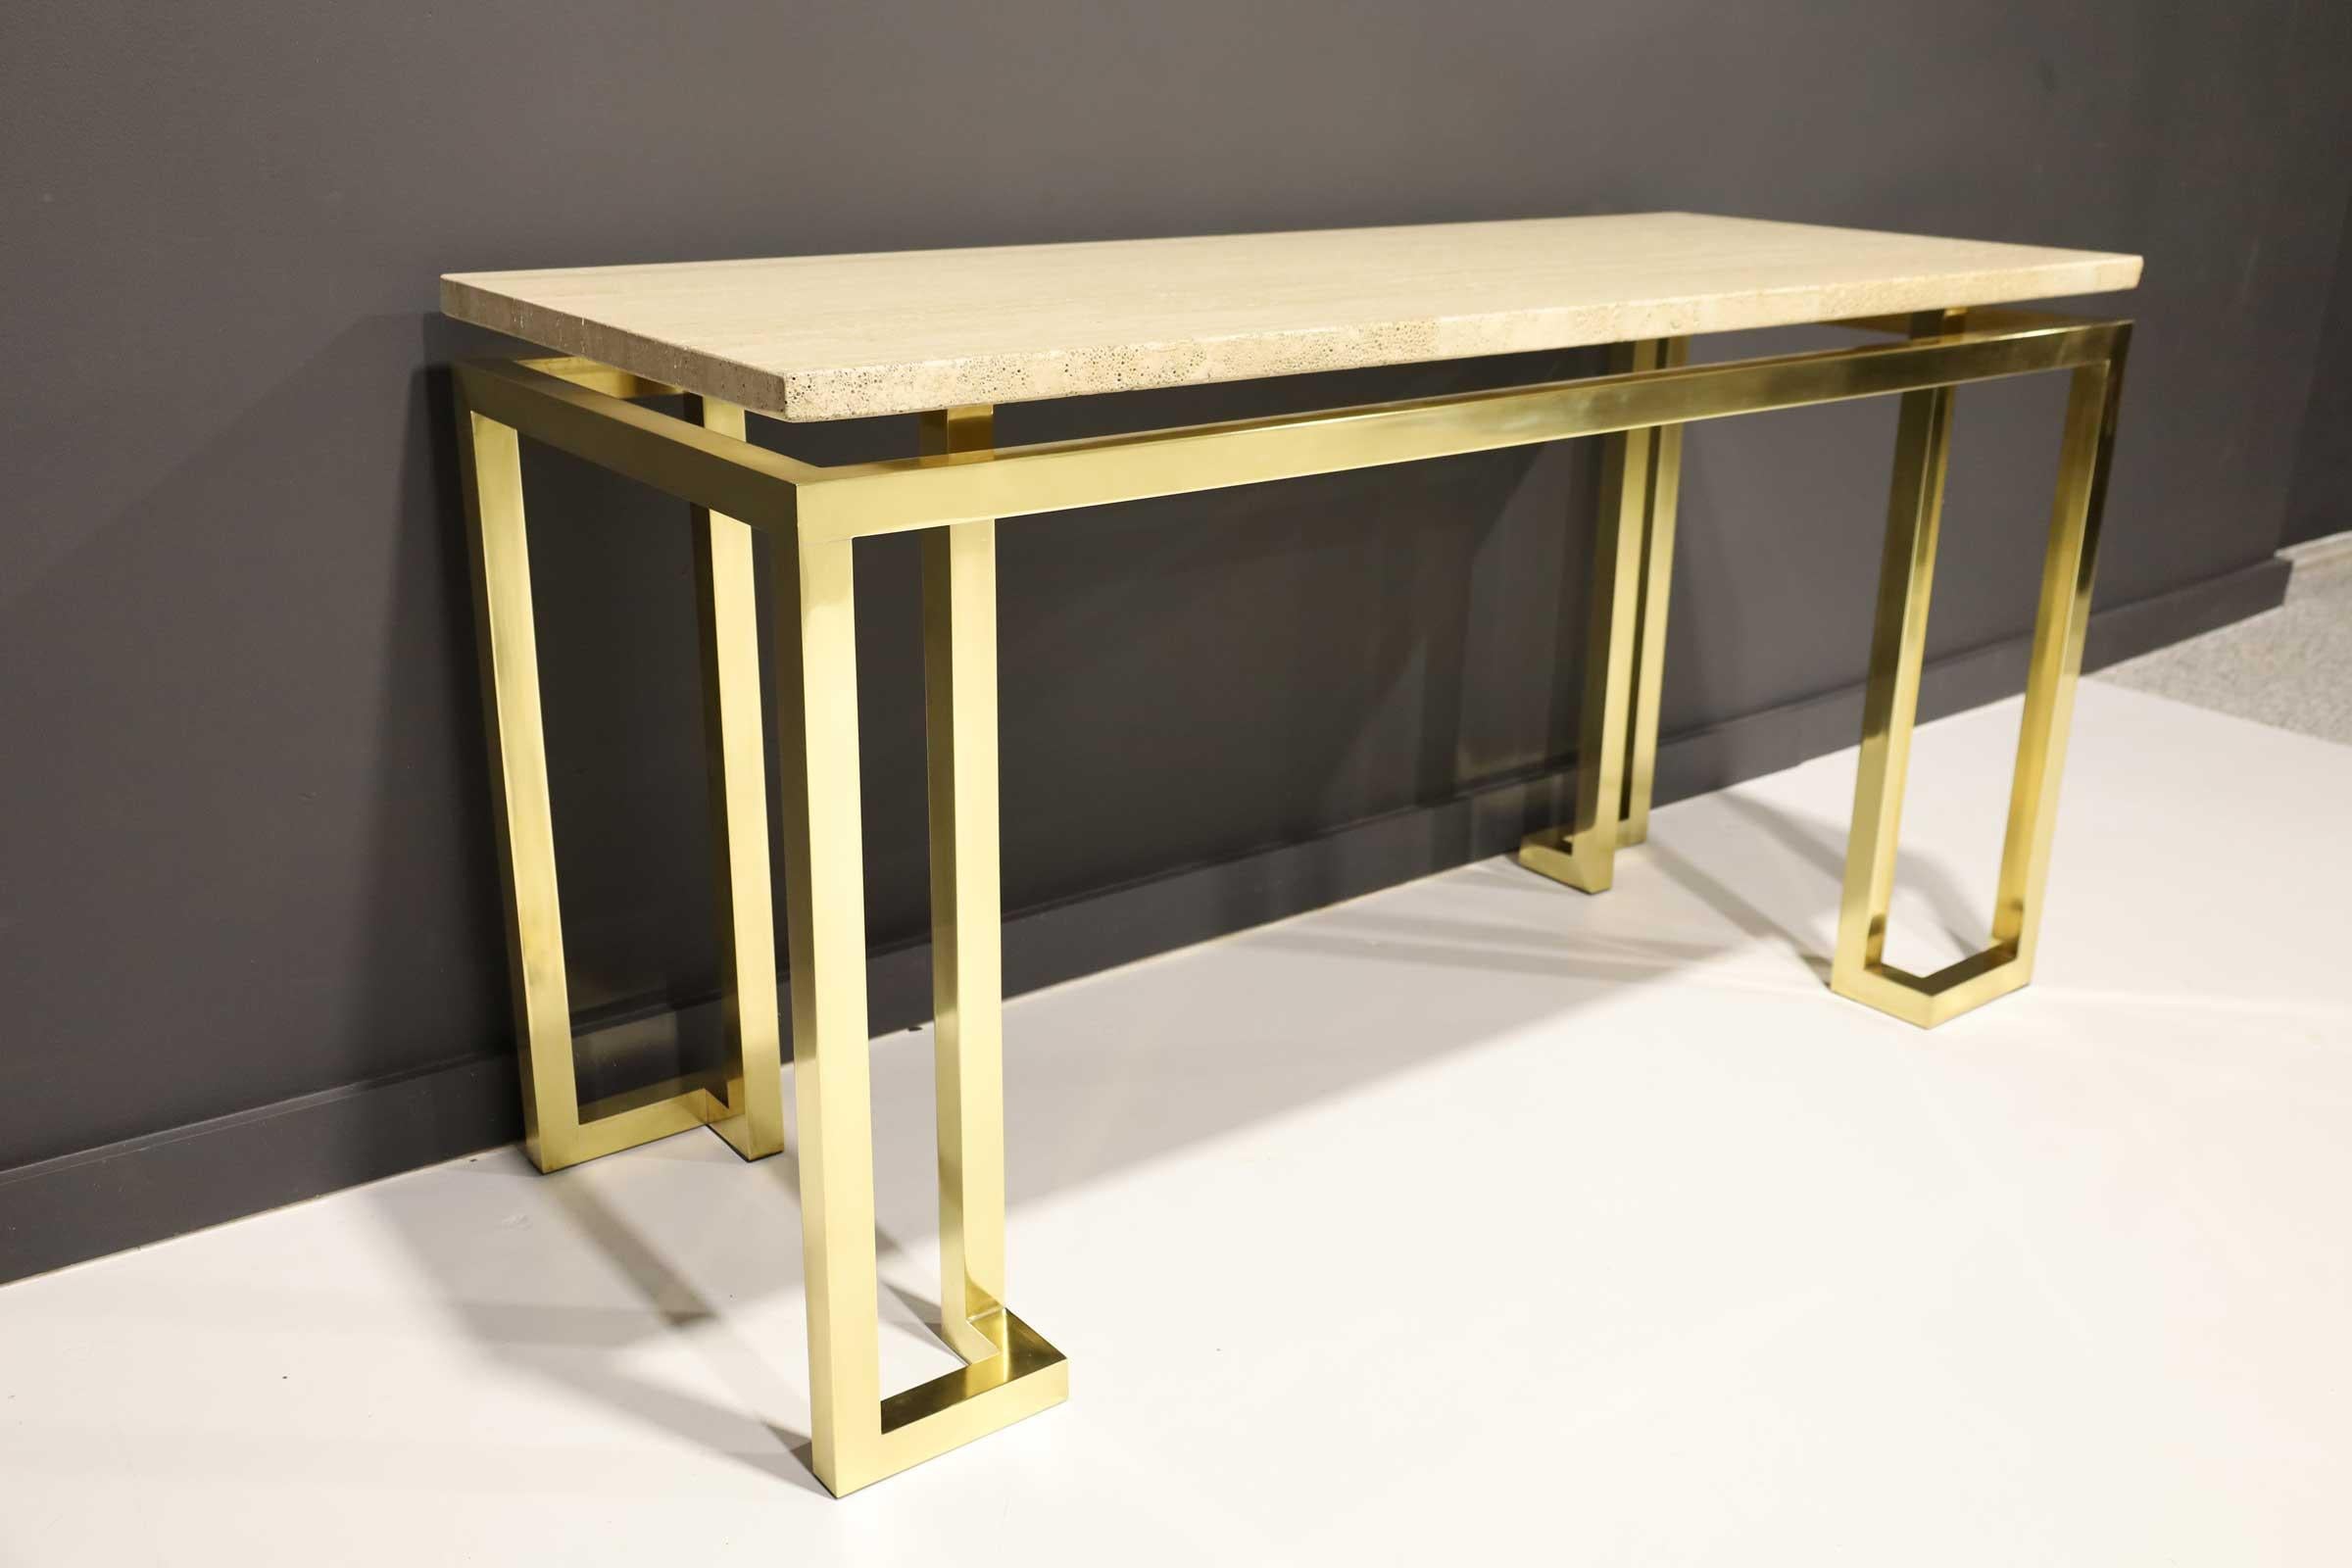 20th Century Paul M. Jones Brass and Travertine Console Table For Sale